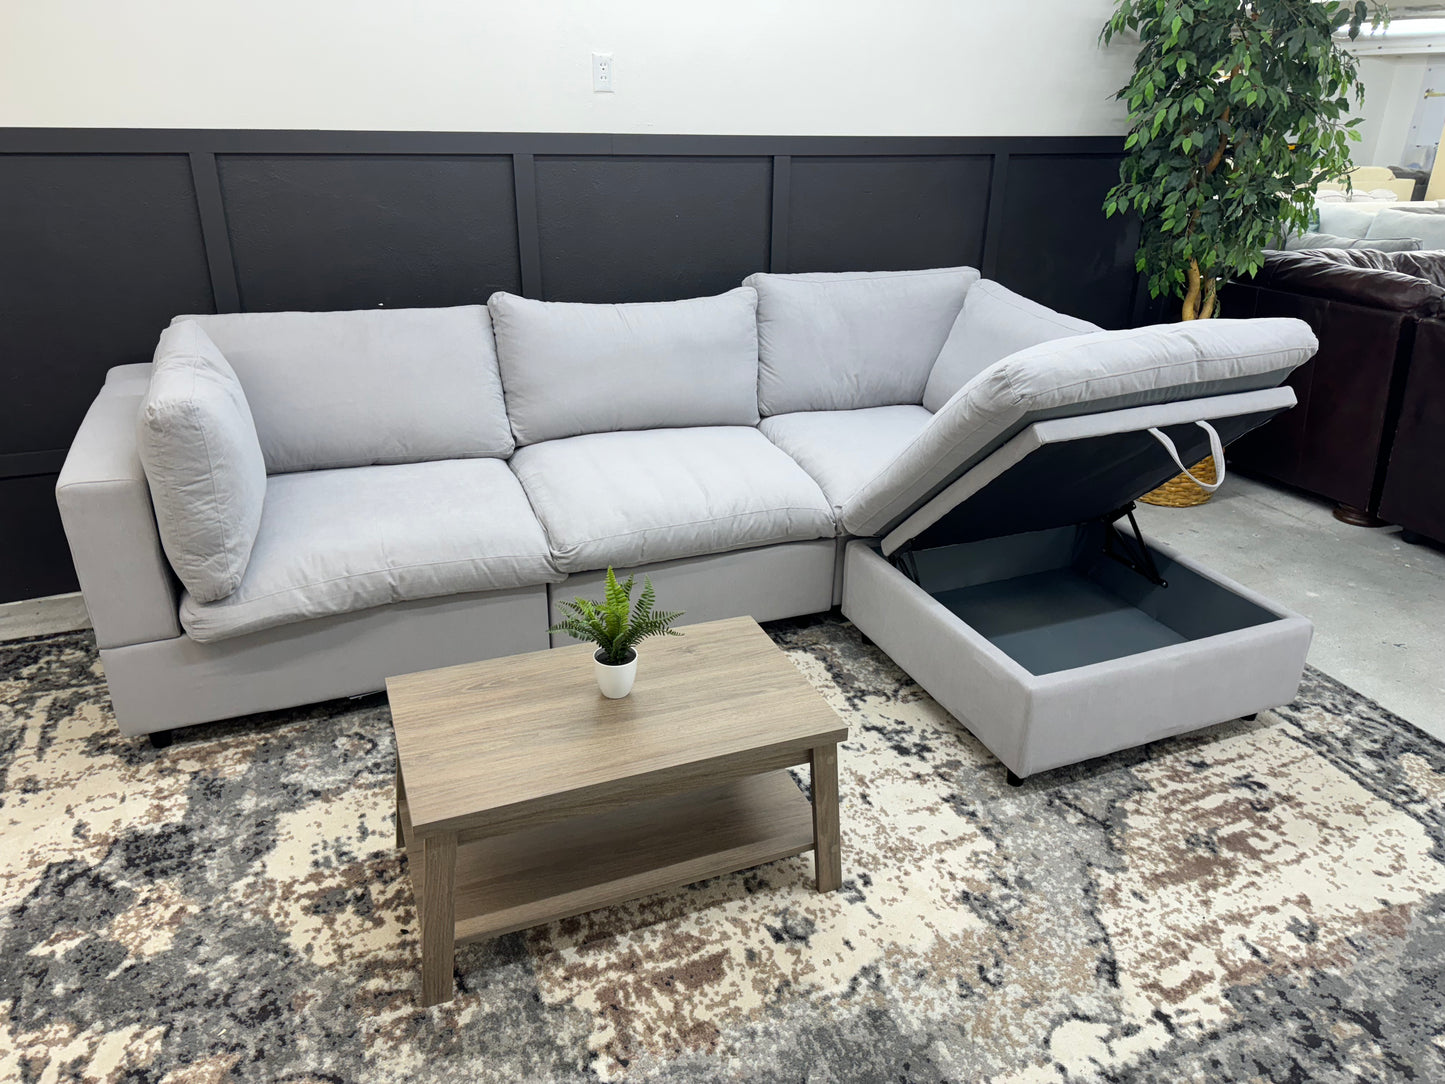 BRAND NEW Light Gray Modular Sectional Cloud Couch